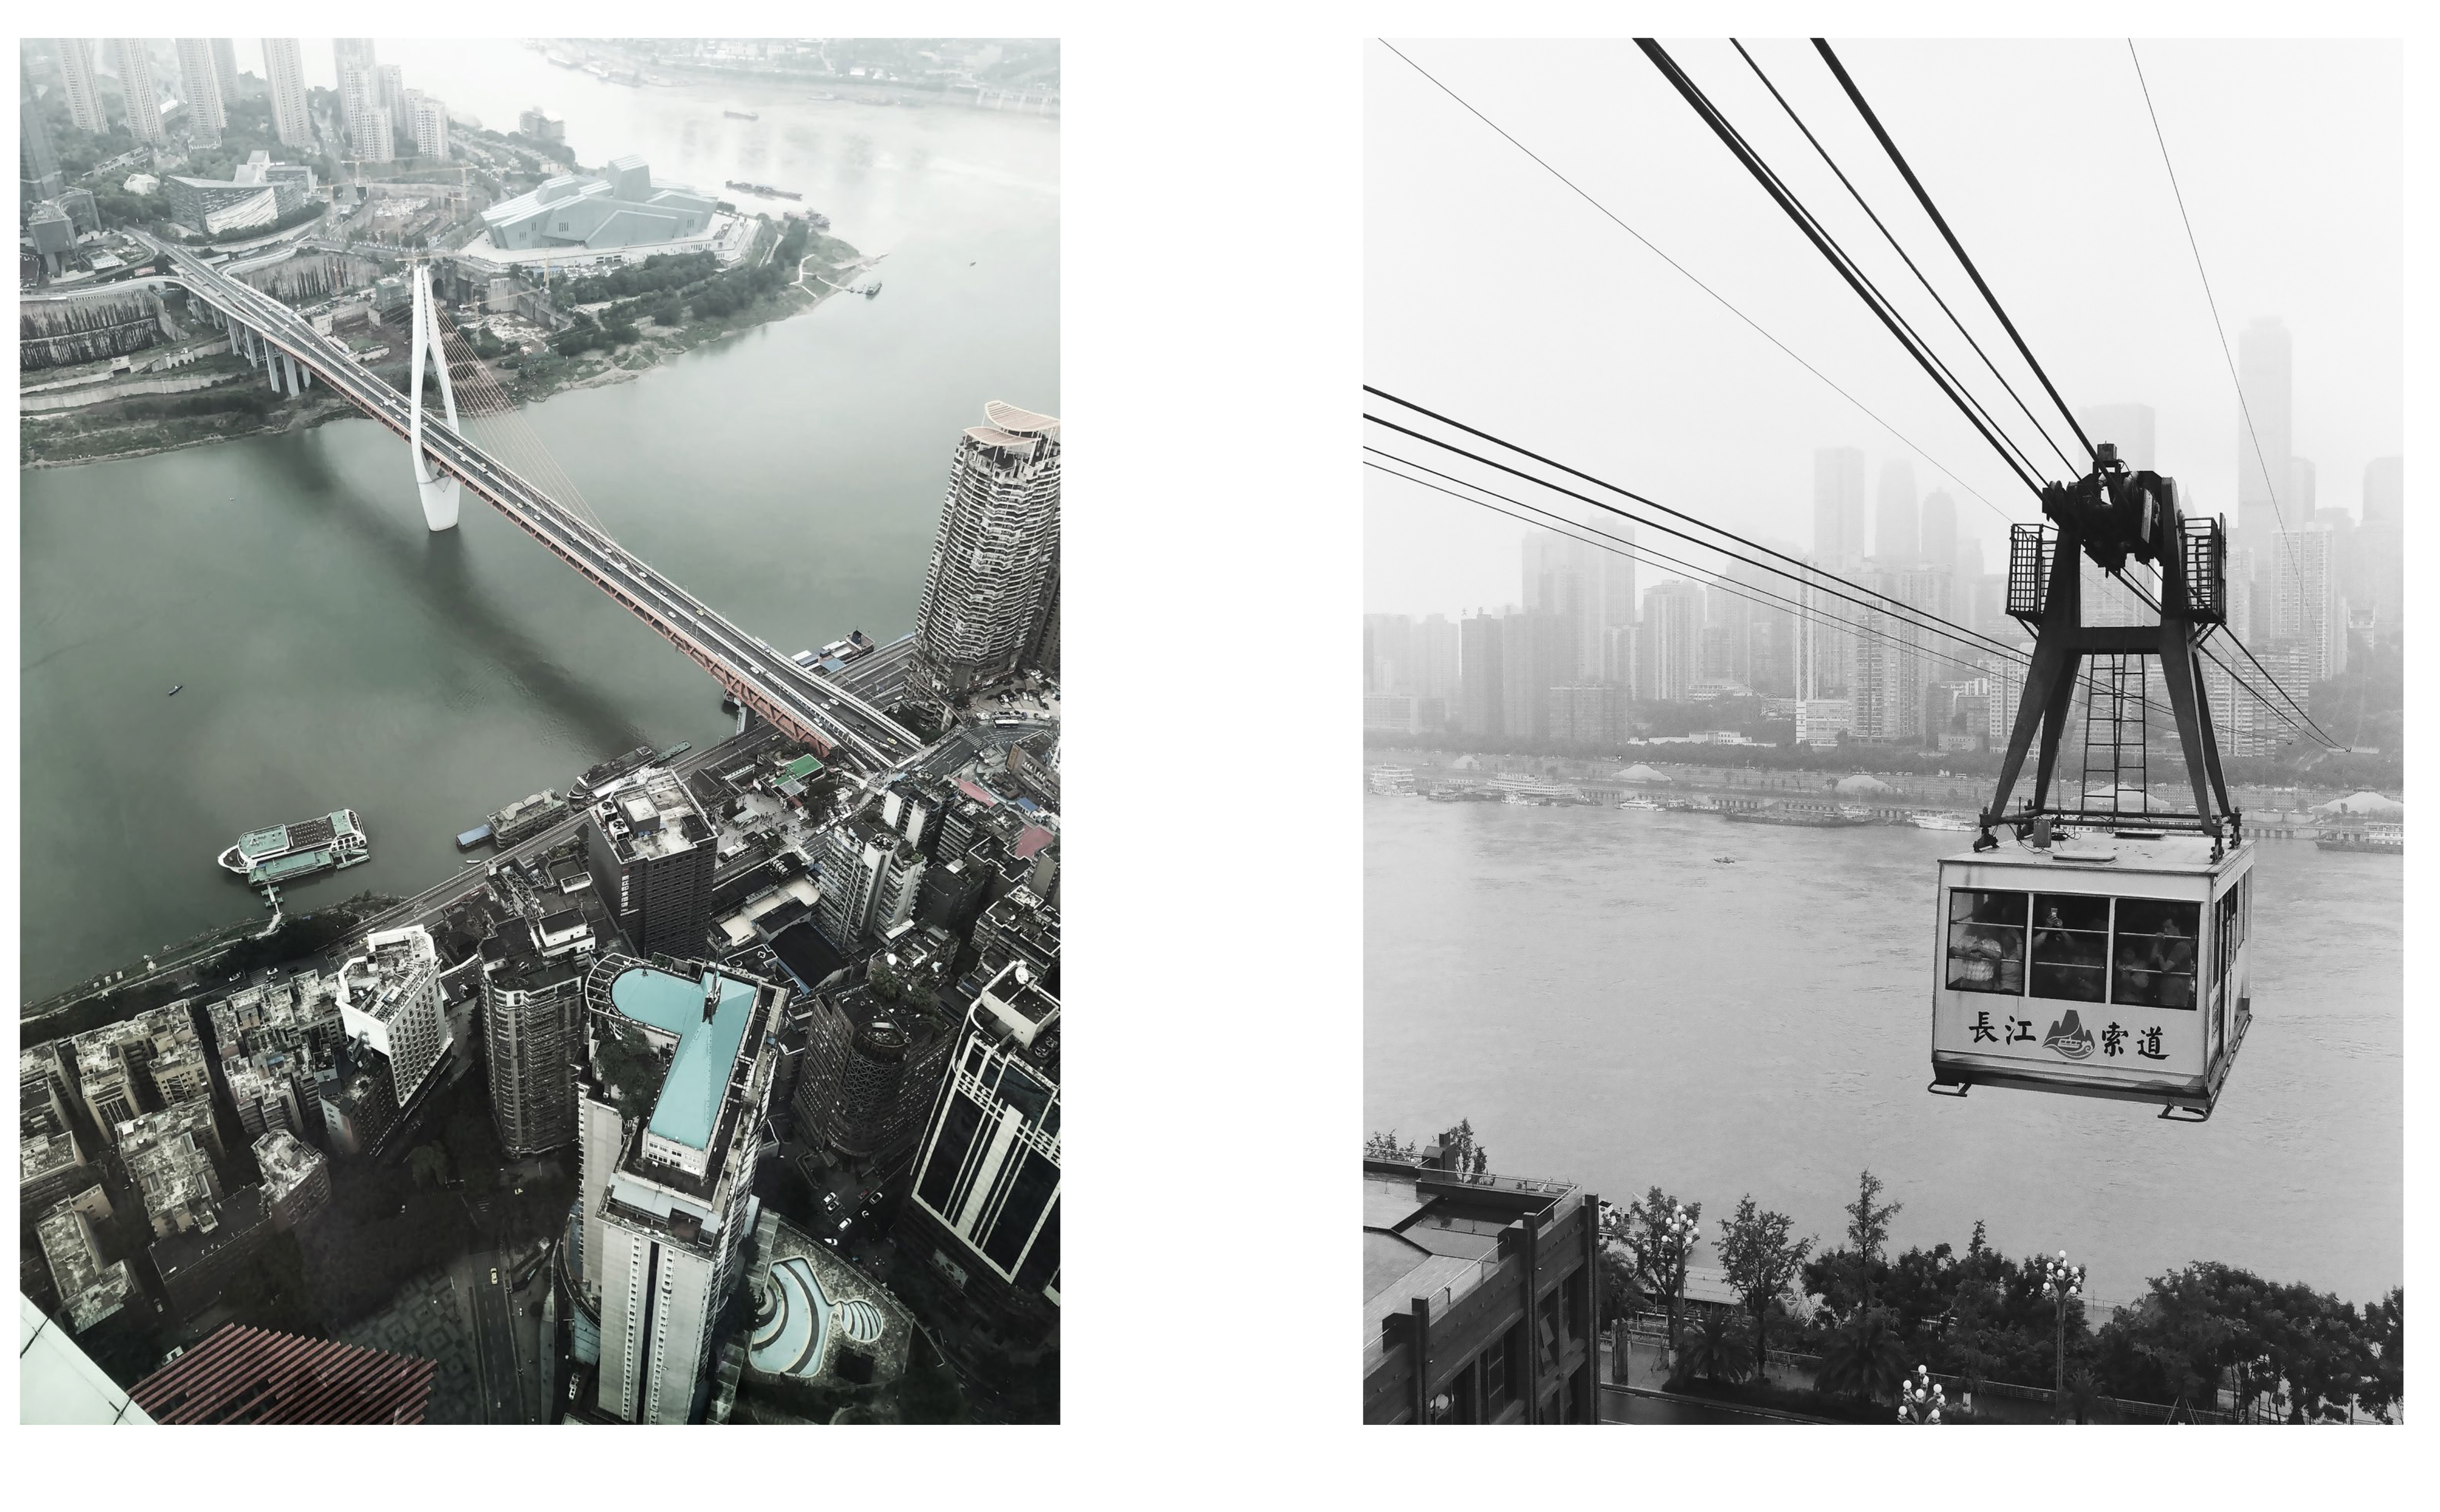 Aerial view of Jialing River: Dongshuimen Bridge, and Yangtze River Cable Car